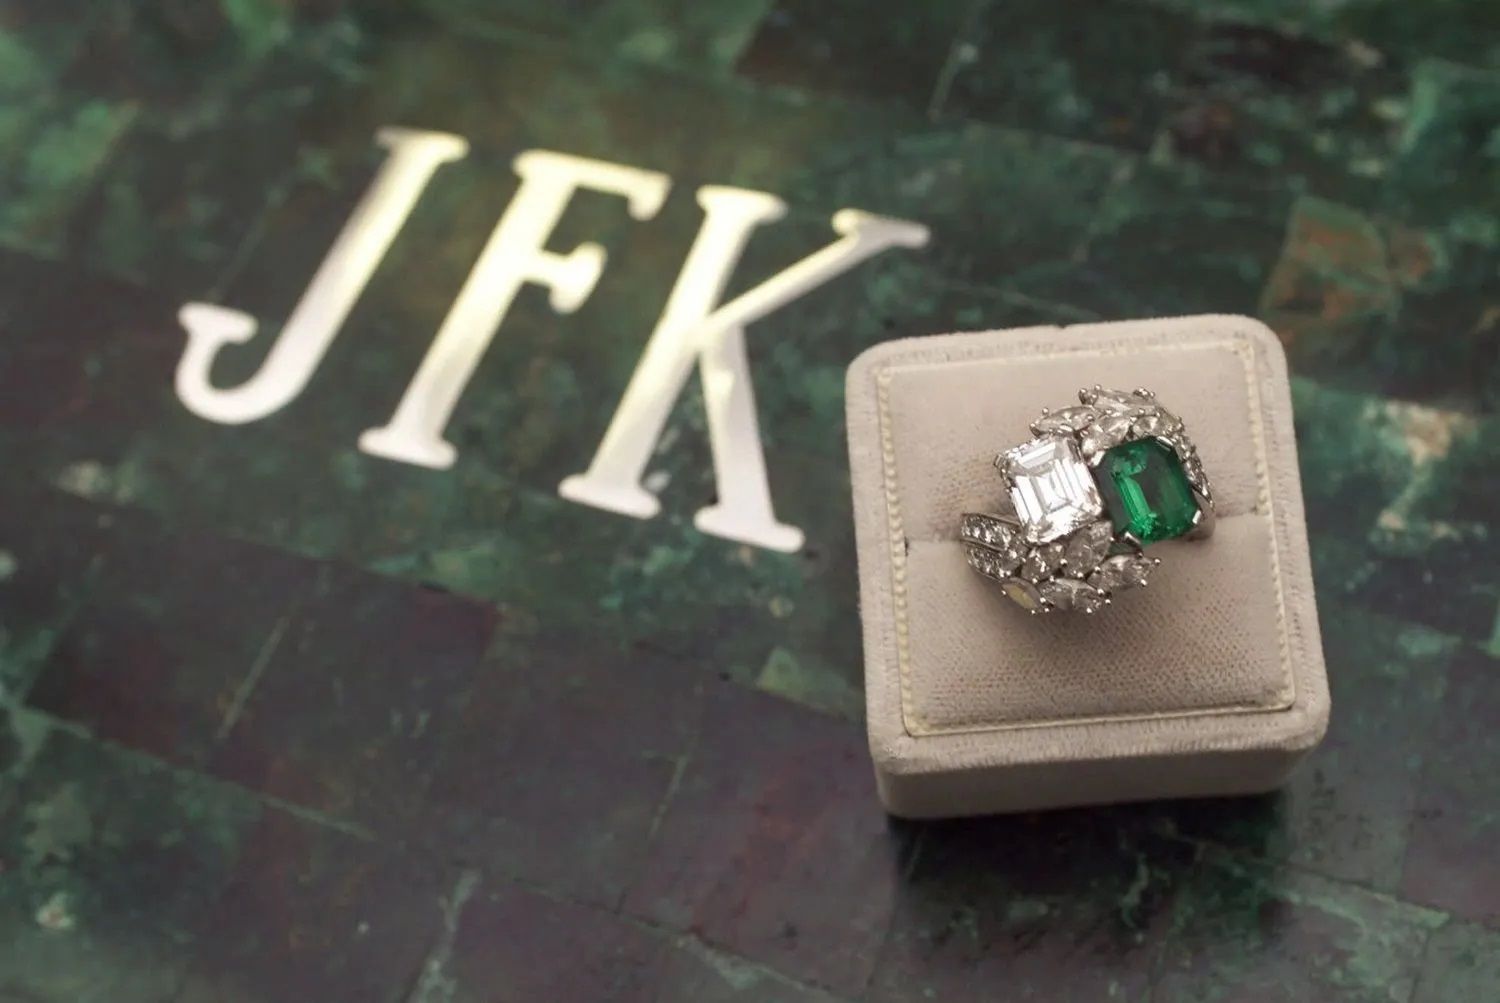 The emerald and diamond engagement ring John F. Kennedy presented to Jackie Kennedy in the early 1960s